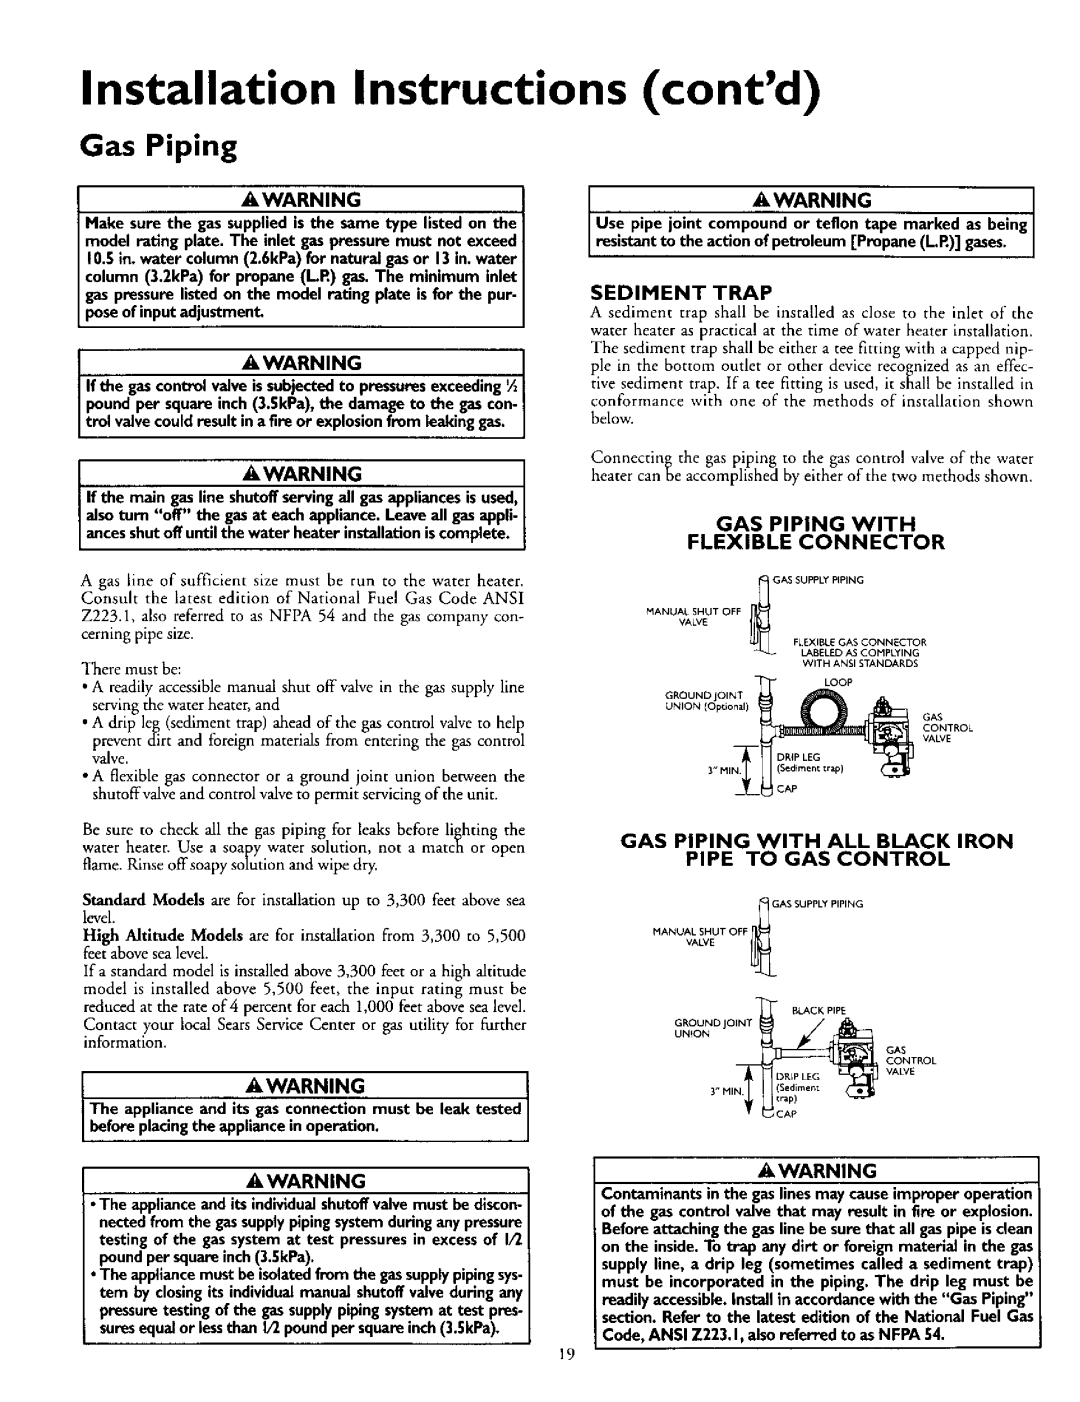 Kenmore 153.335942, L53.335816 Installation Instructions contd, Awarningi, Gas Piping With Flexible Connector 